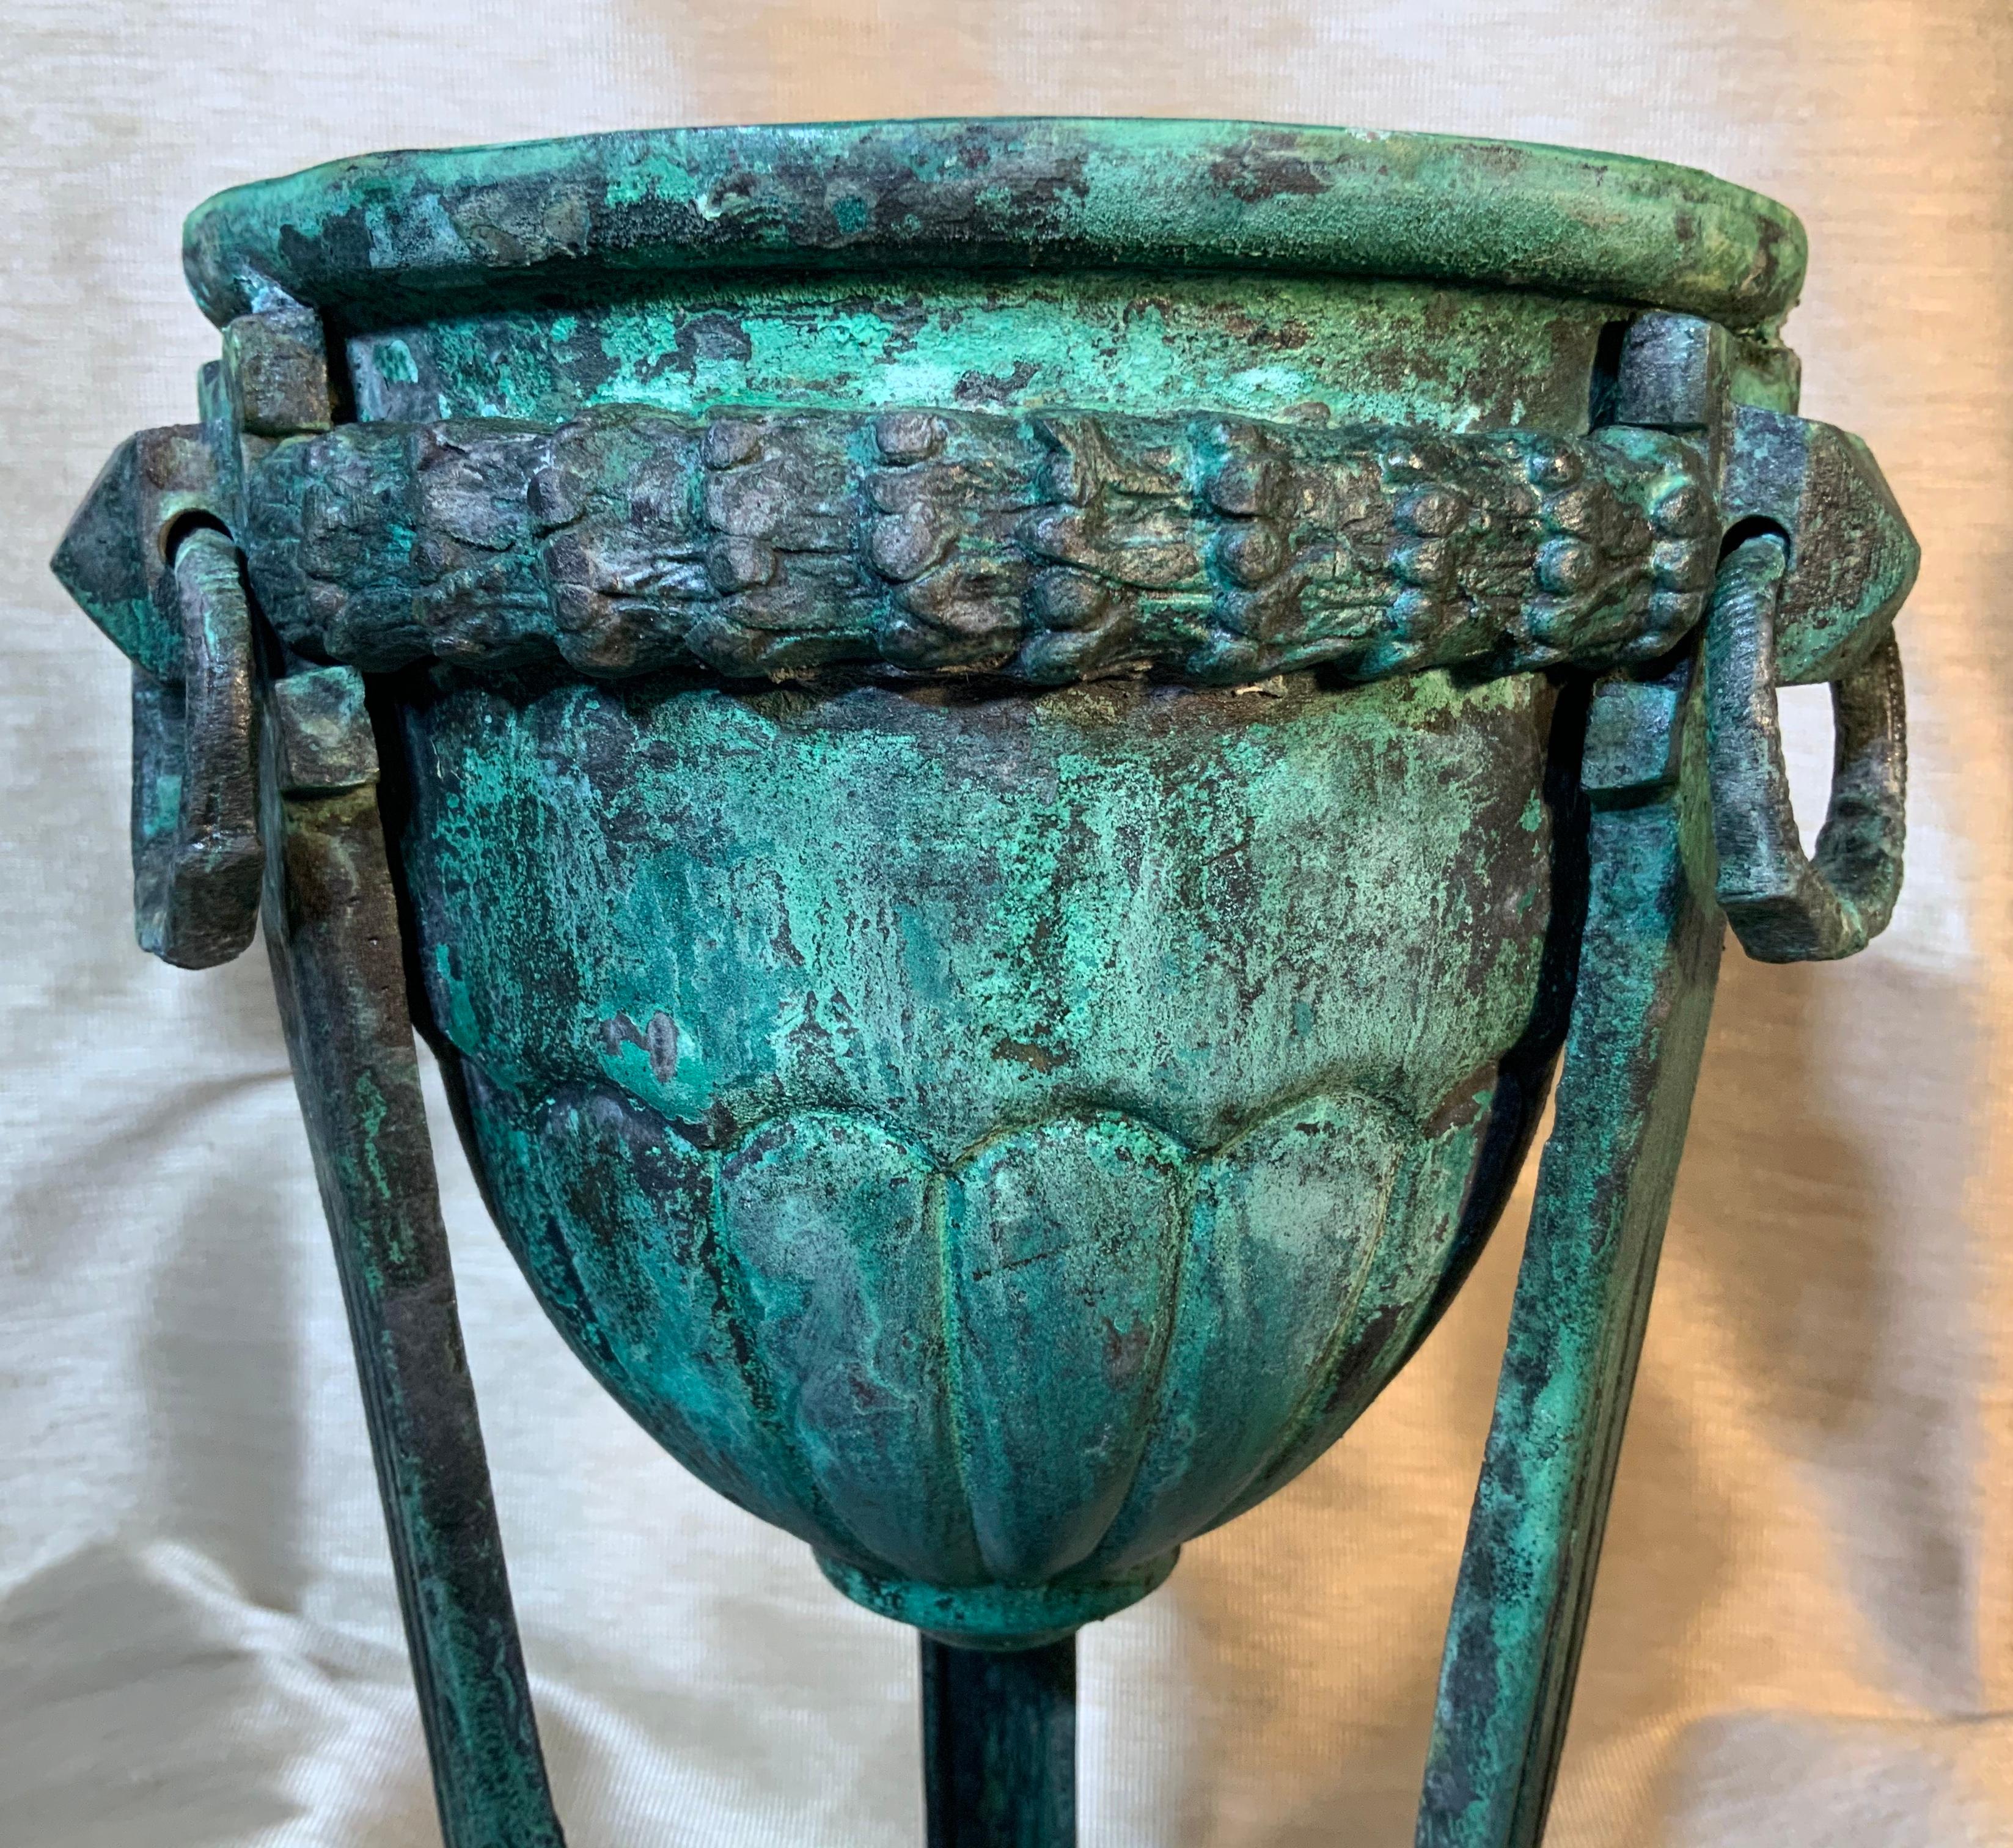 Exceptional antique French bronze architectural element used as decorative object of art. Beautiful oxidized green-turquoise patina, lion heads vine and Greek key motifs, one of a kind object of art for display.